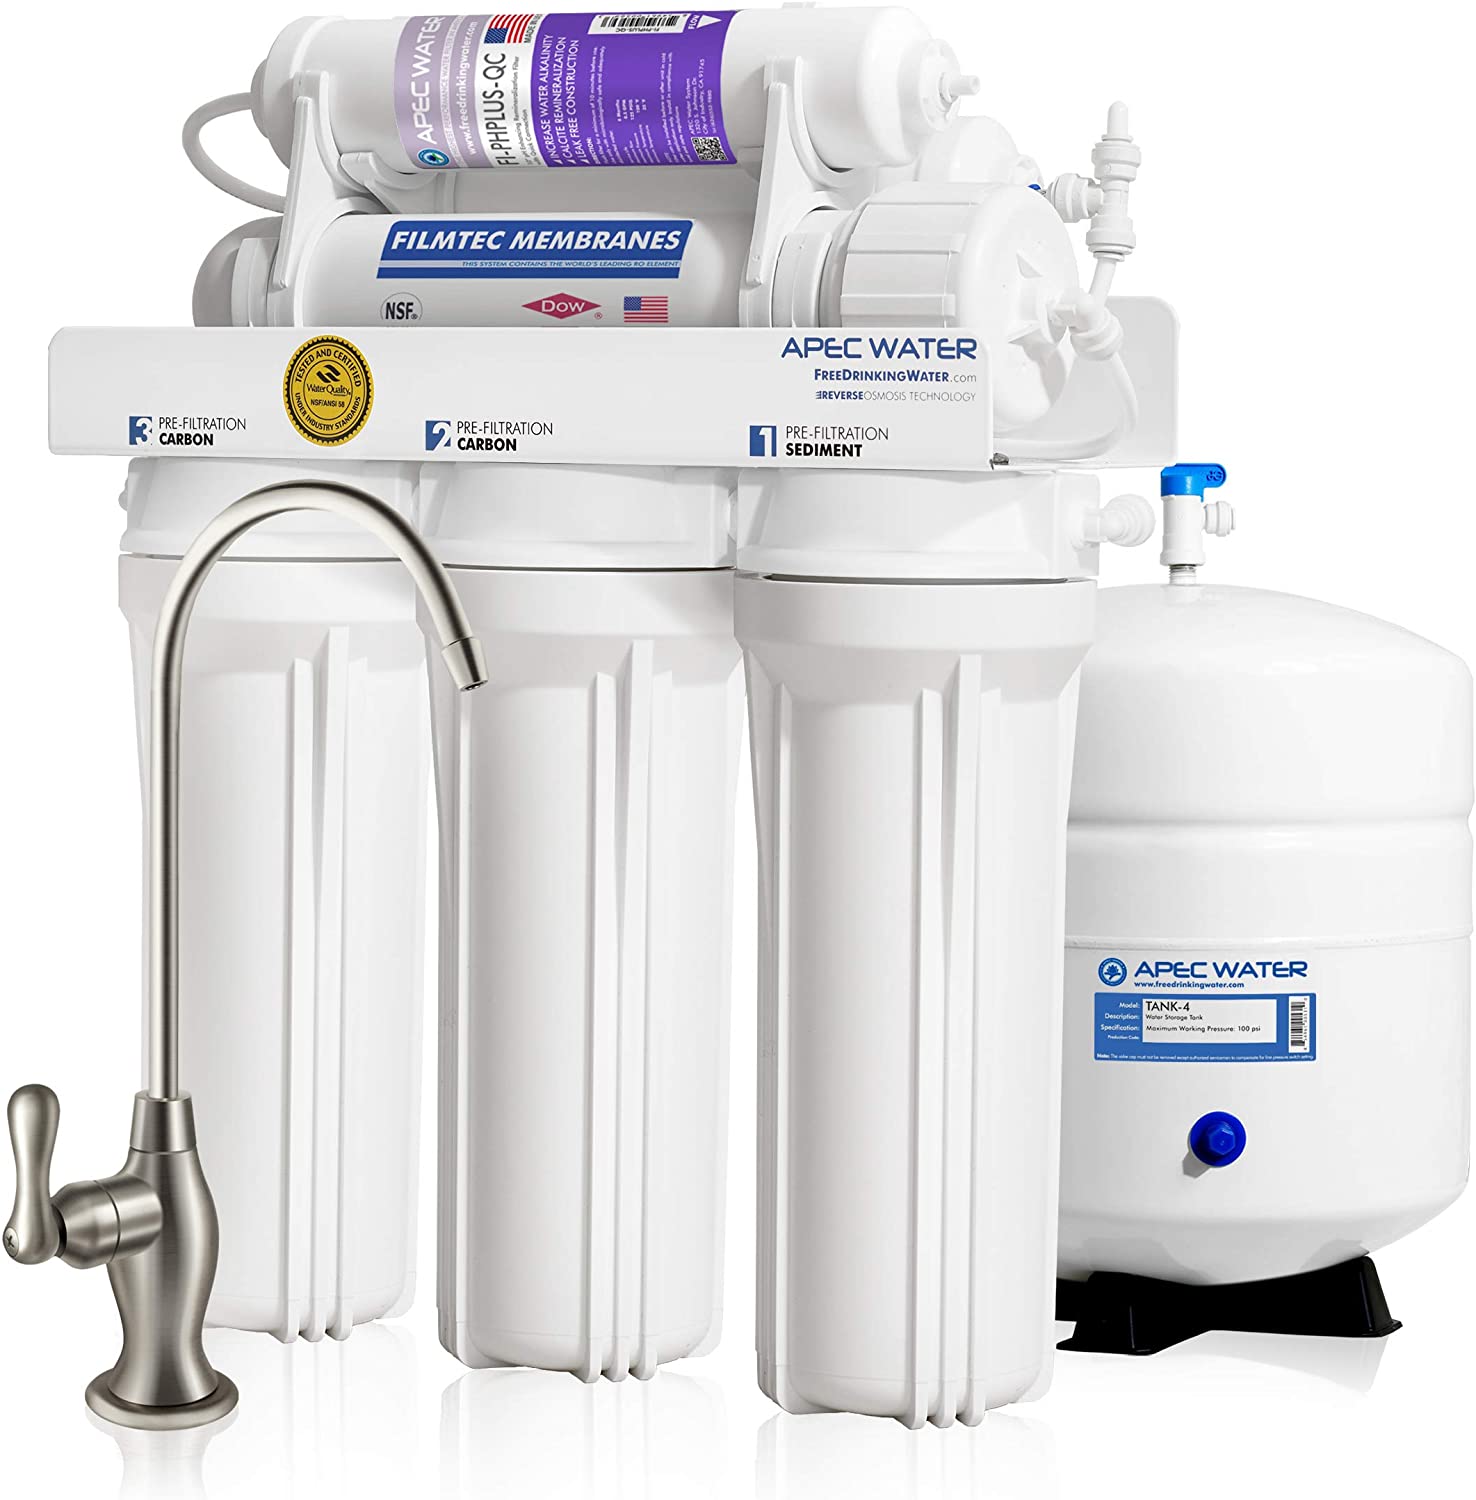 Reverse osmosis water filtration system [also known as “RO”]